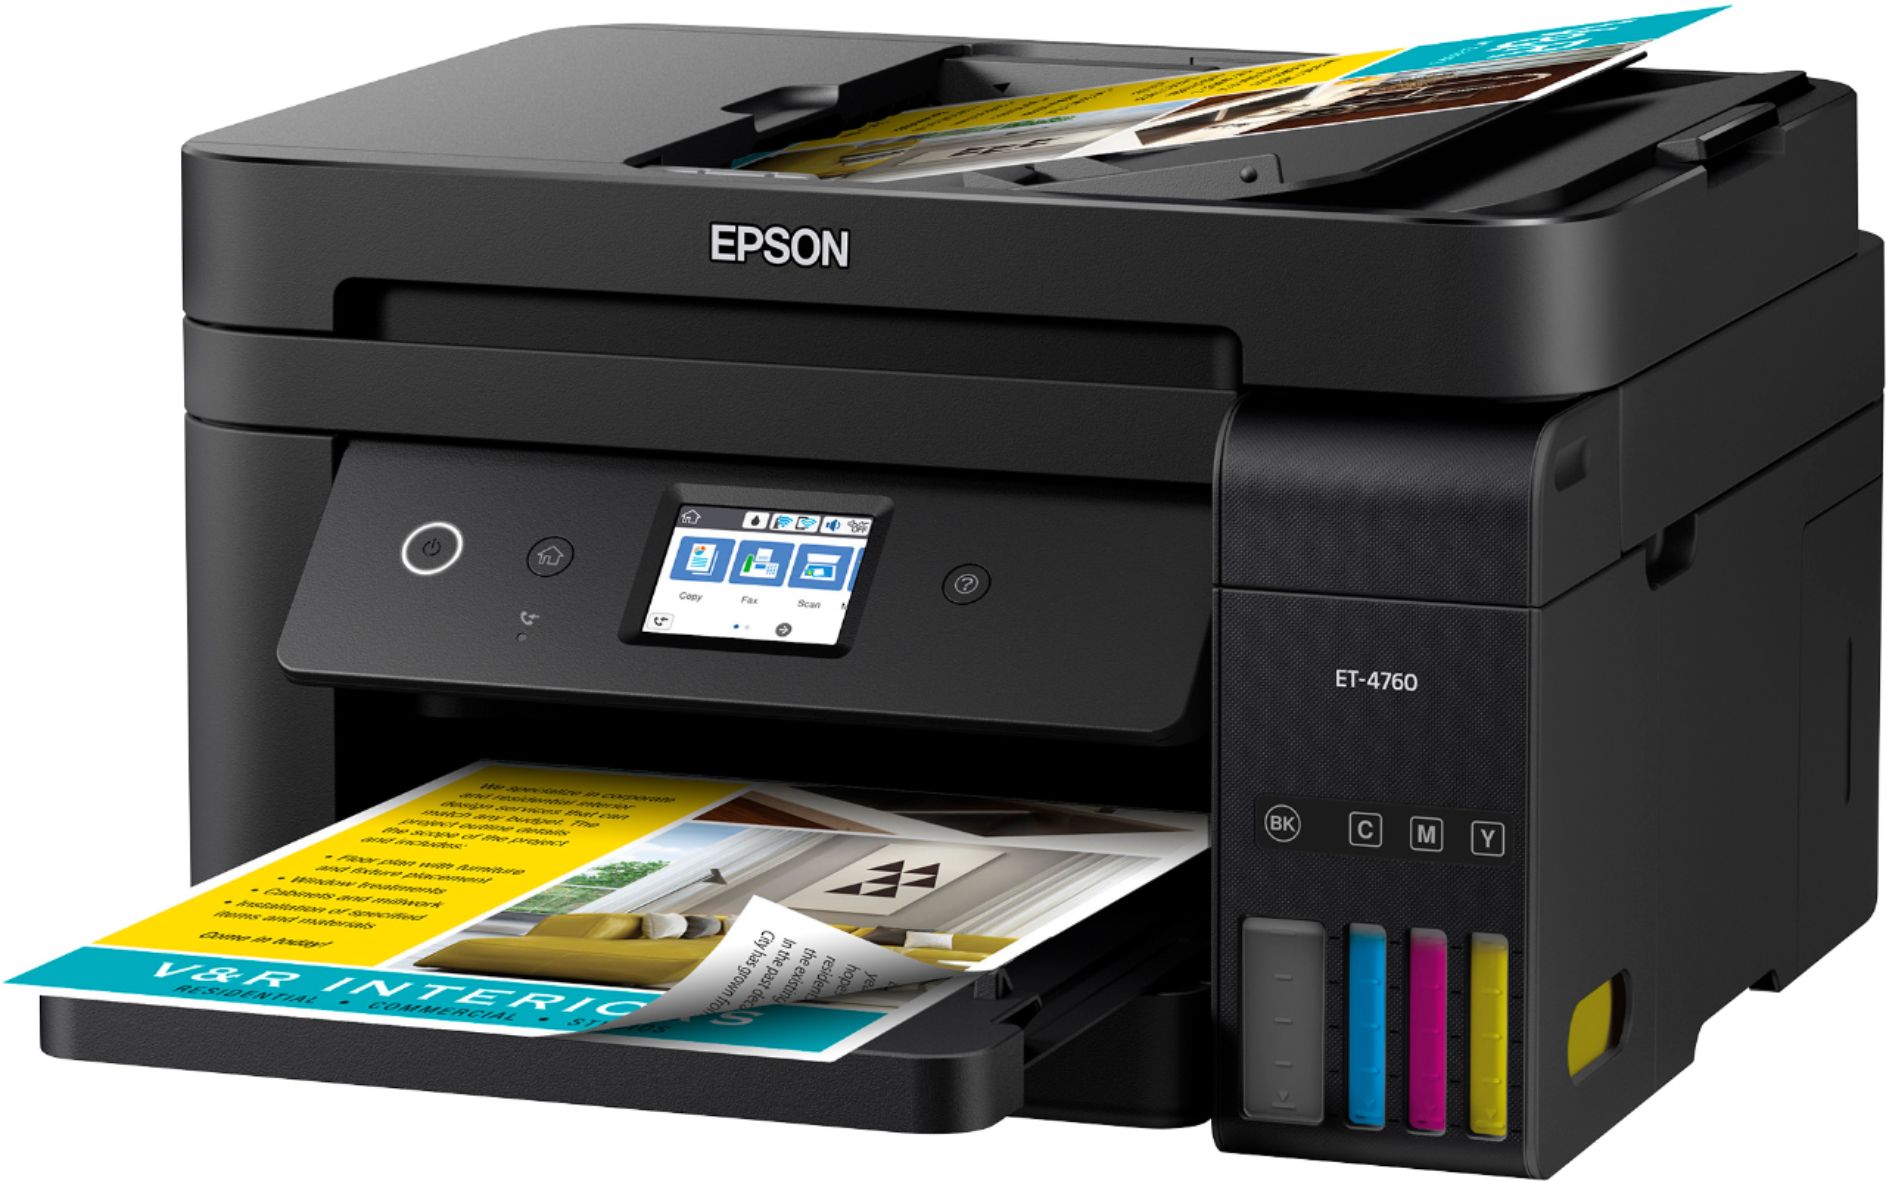 Questions and Answers: Epson EcoTank ET-4760 Wireless All-In-One